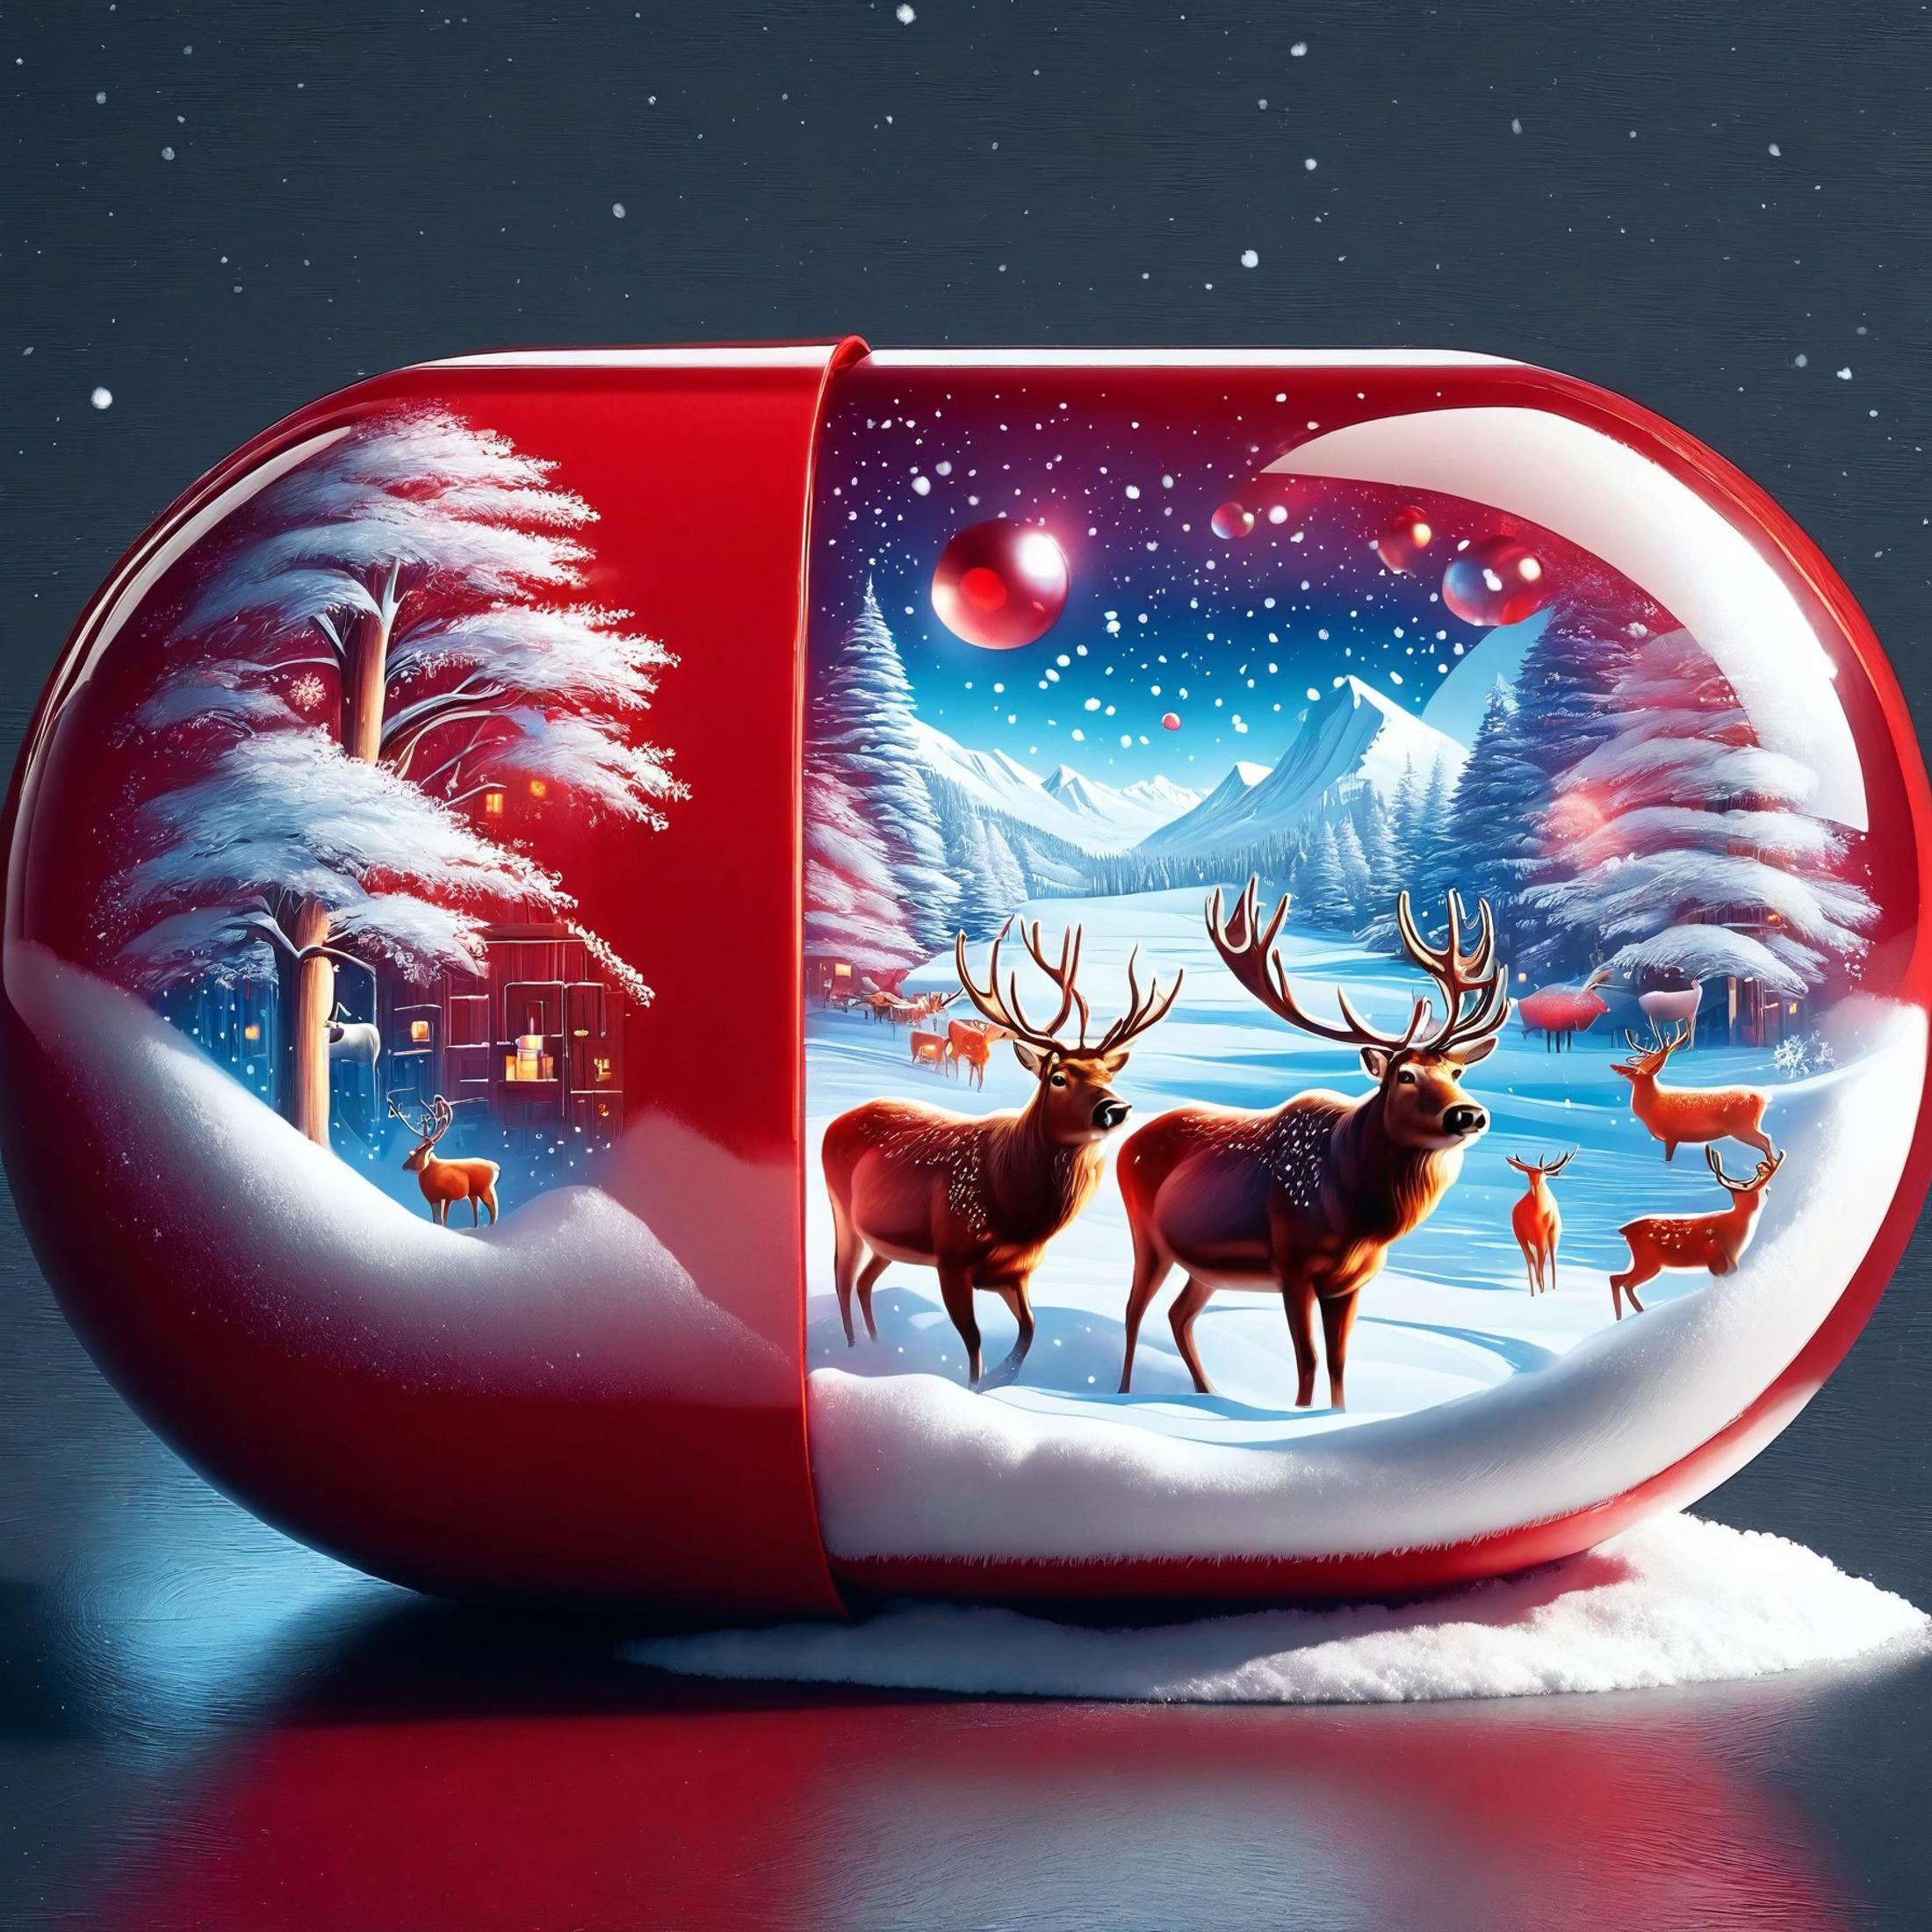 A red ornate Christmas ball with reindeer and snowy trees.